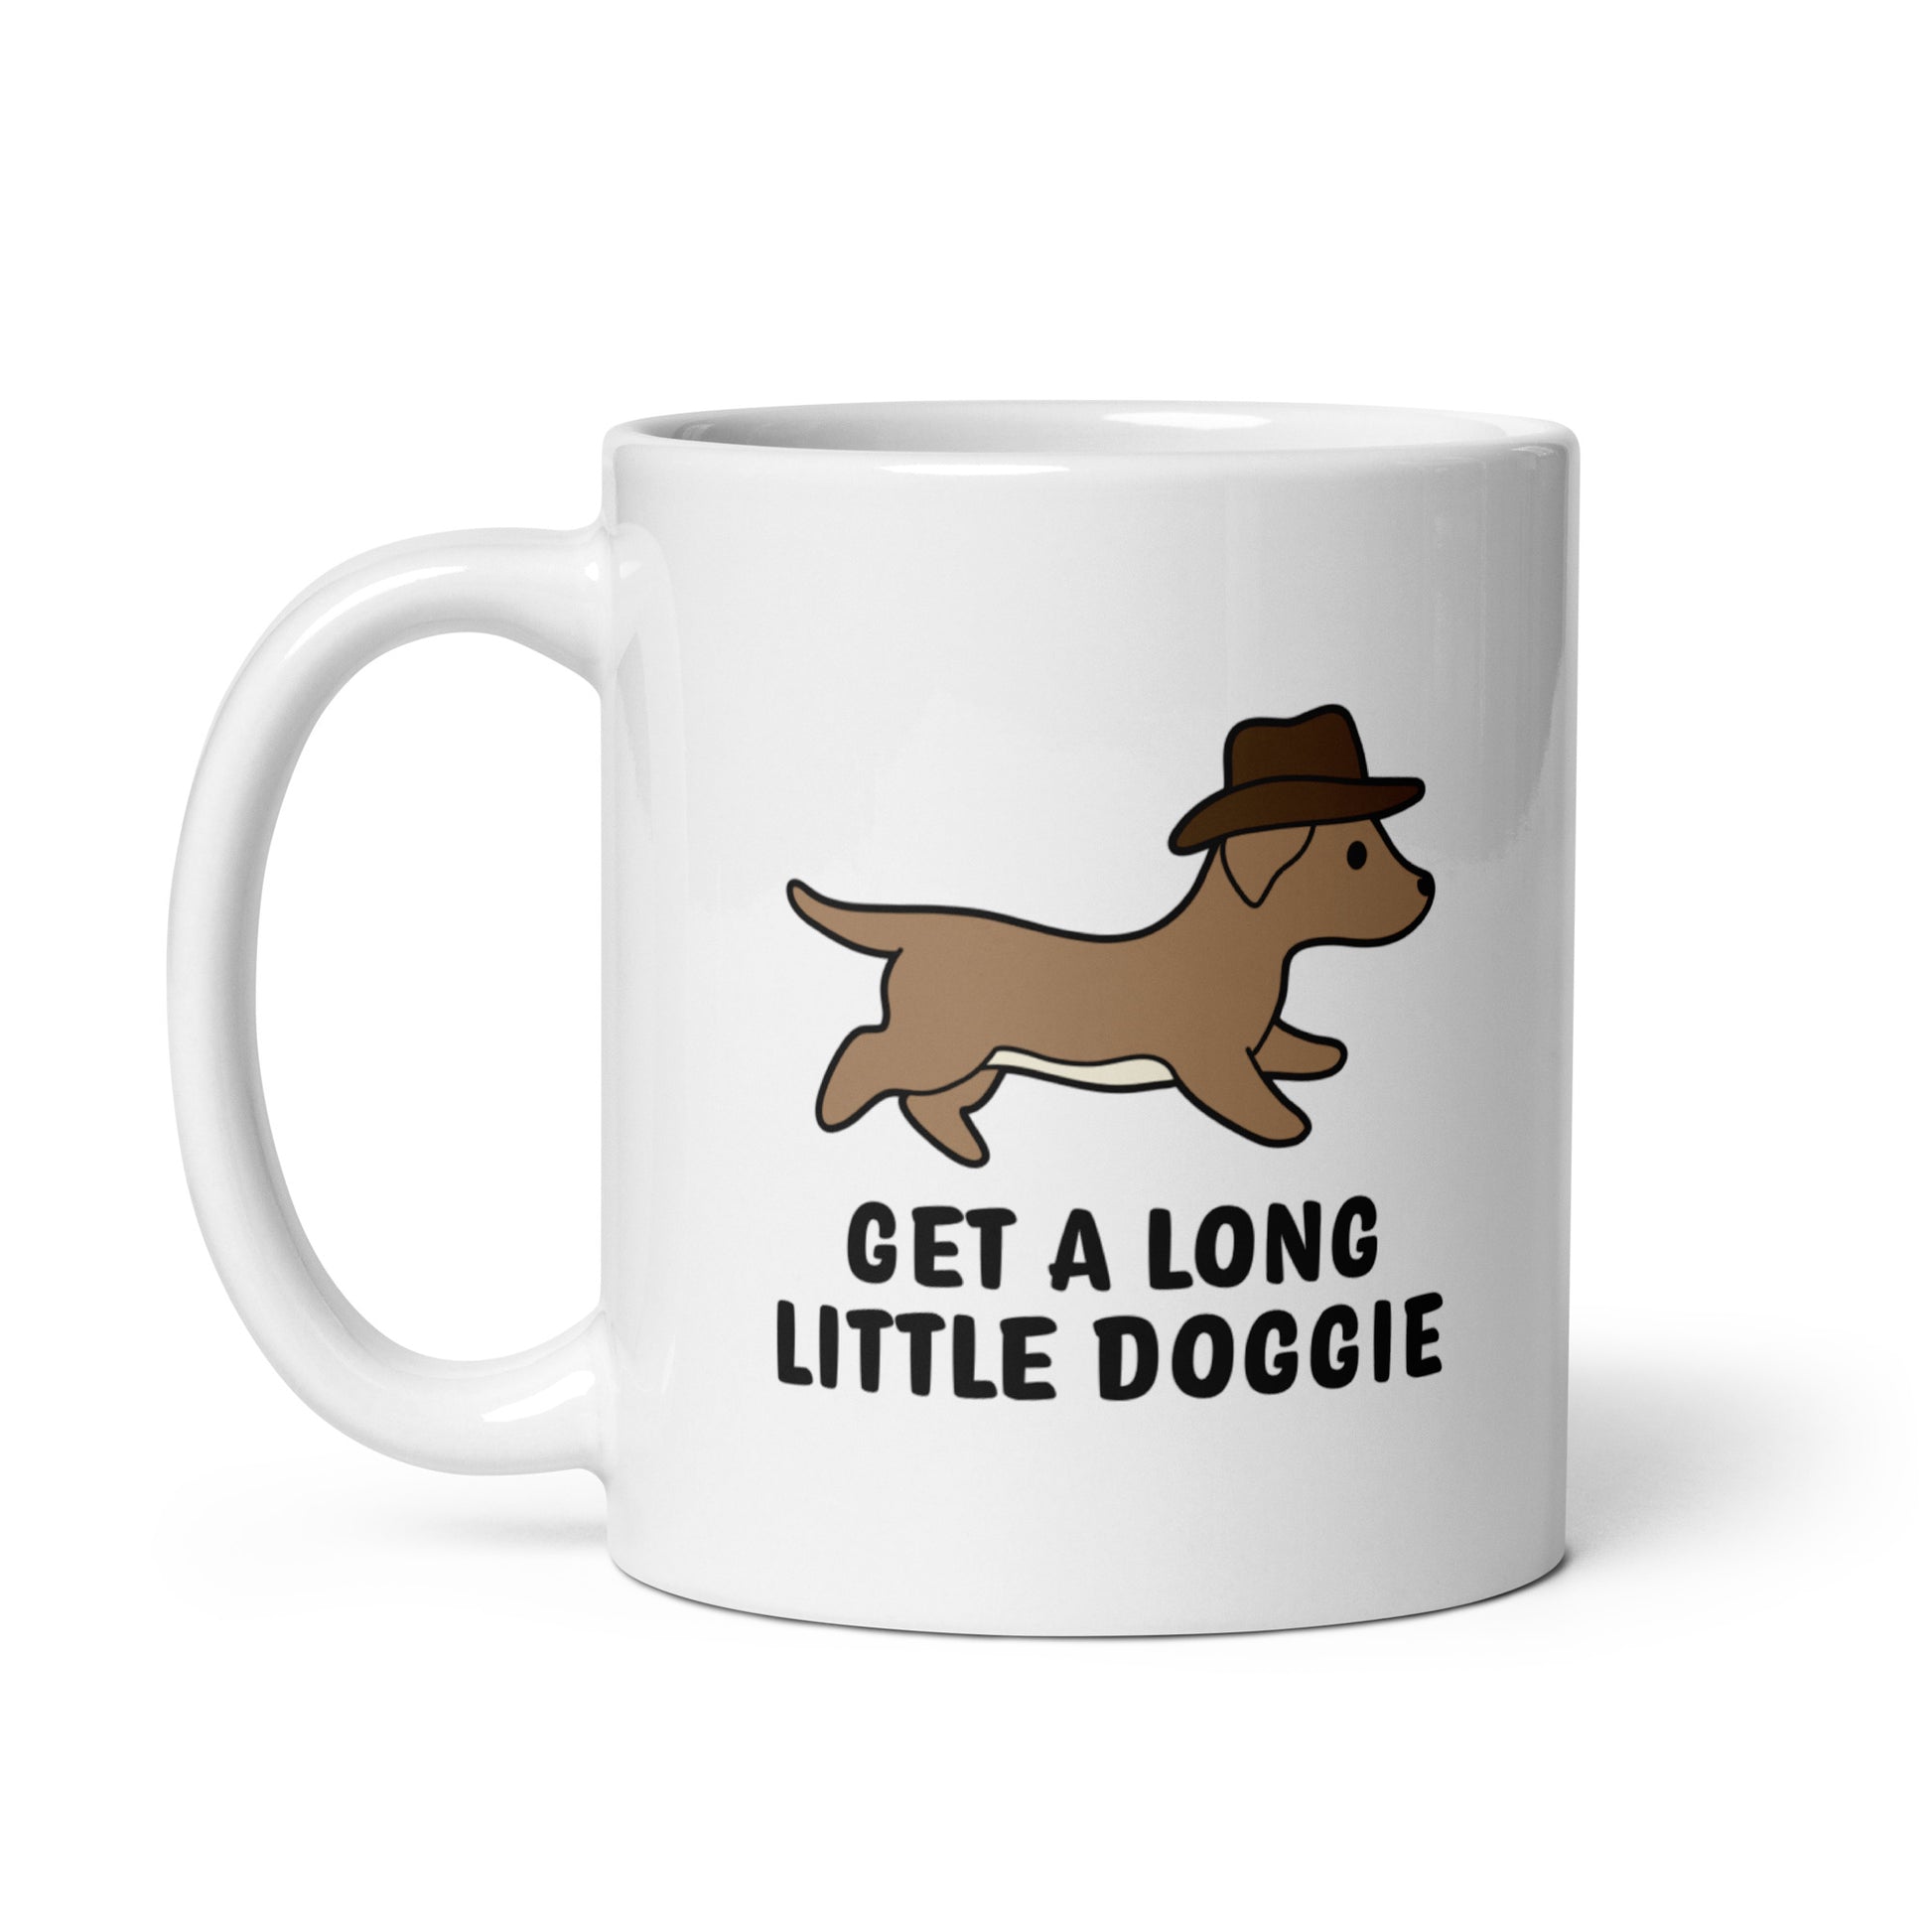 A white 11 ounce ceramic mug featuring an image of a dachshund wearing a cowboy hat. Text below the dog reads "Get a long little doggie"